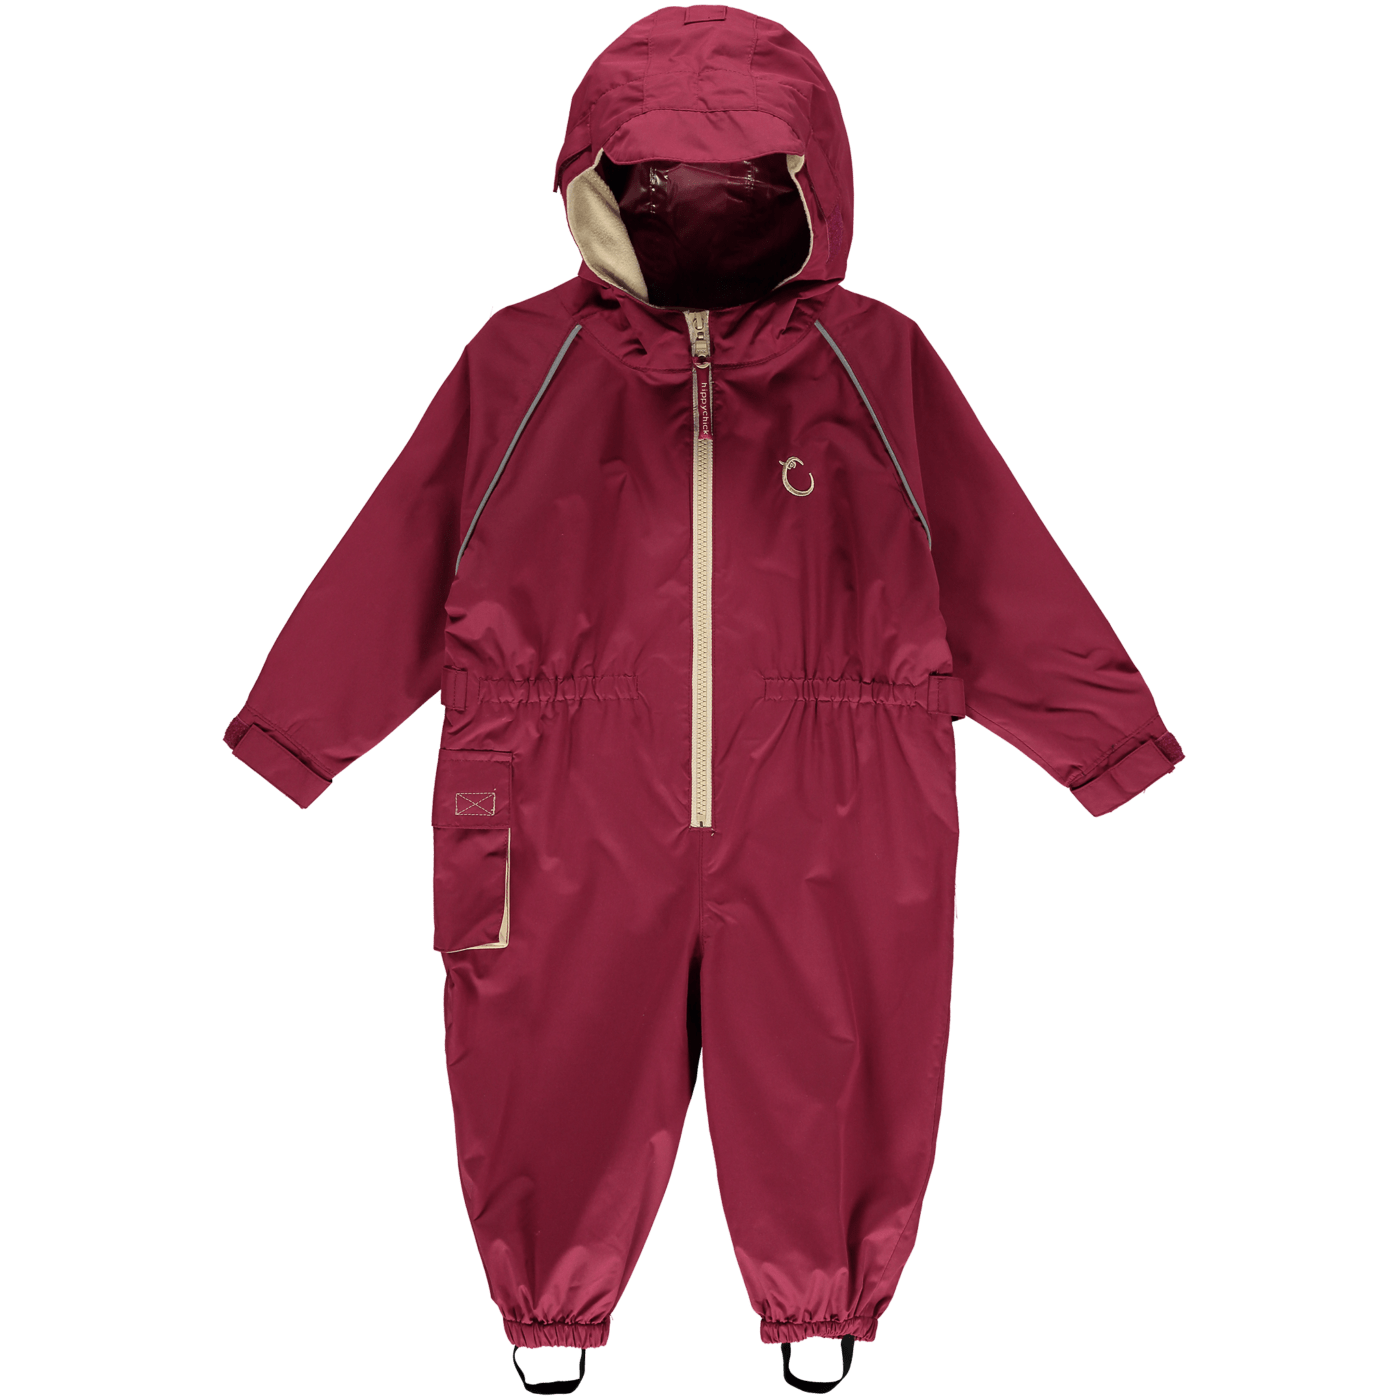 Hippychick Waterproof All in One Suit - Raspberry